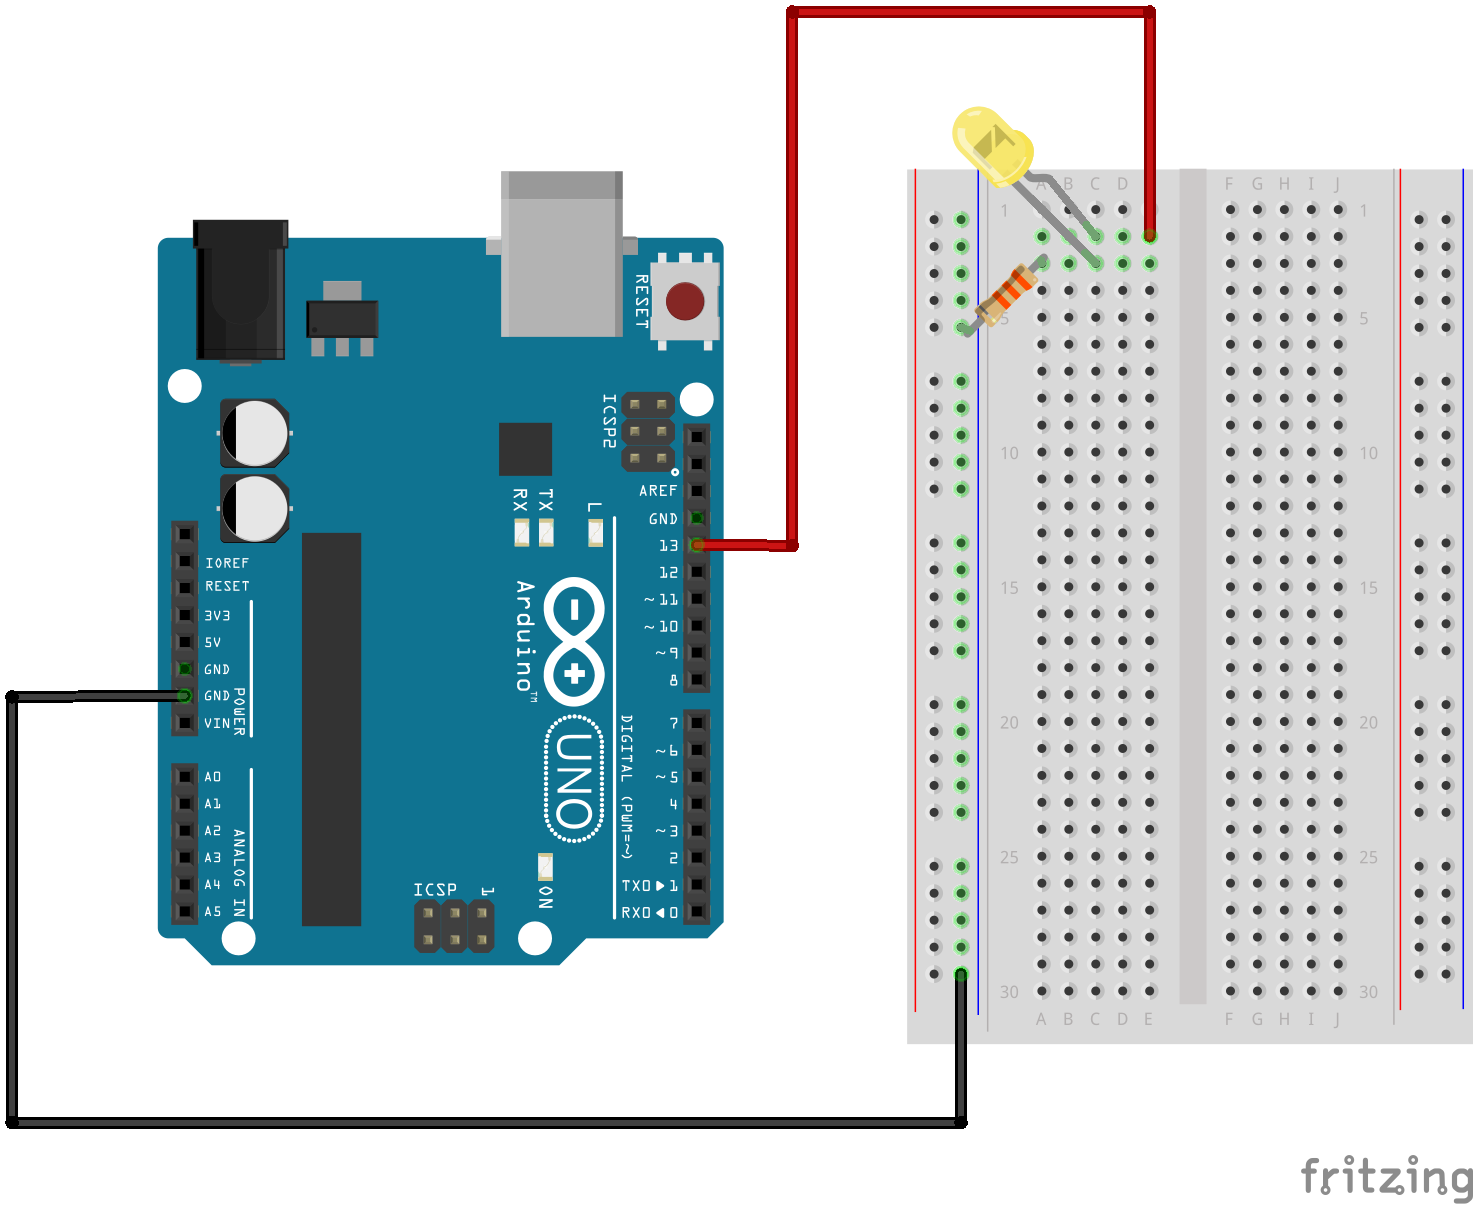 SIK Experiment Guide for Arduino - V3.2 - learn.sparkfun.com